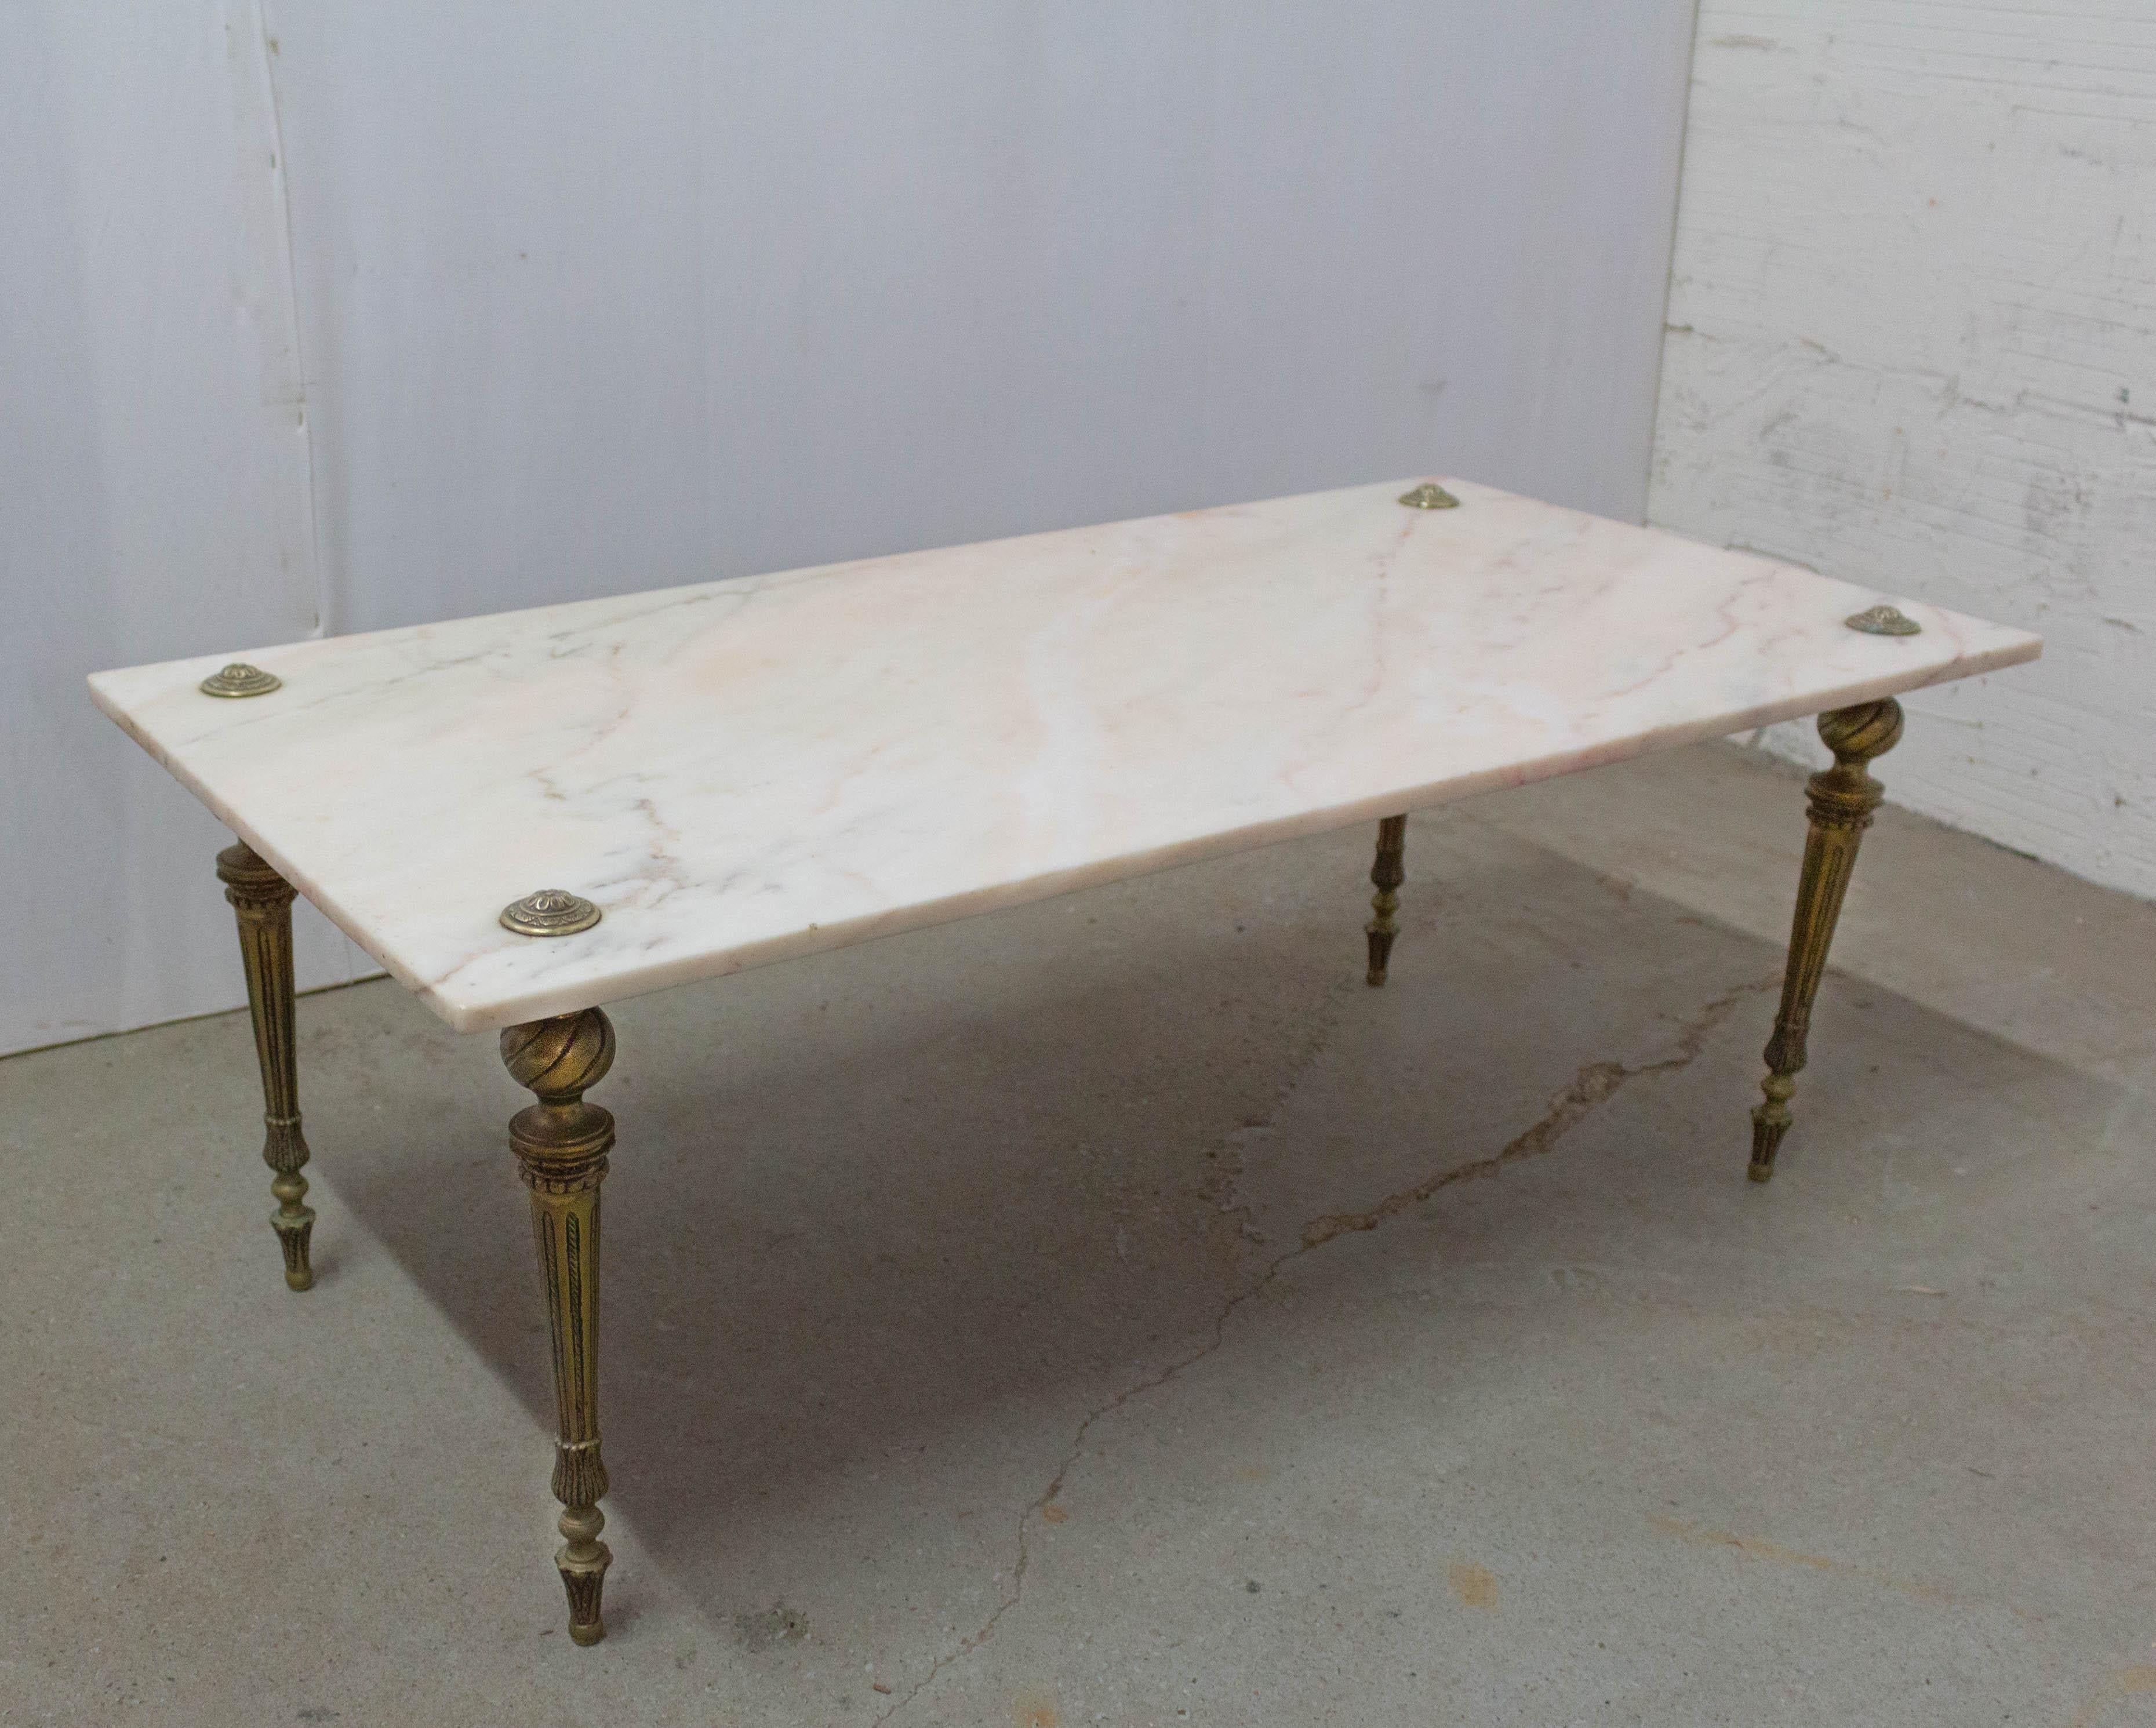 Coffee table brass and marble French vintage circa 1960
Style Louis XIV
Good condition 

Shipping:
L 110/P 68/H 6 cm 36 kg.